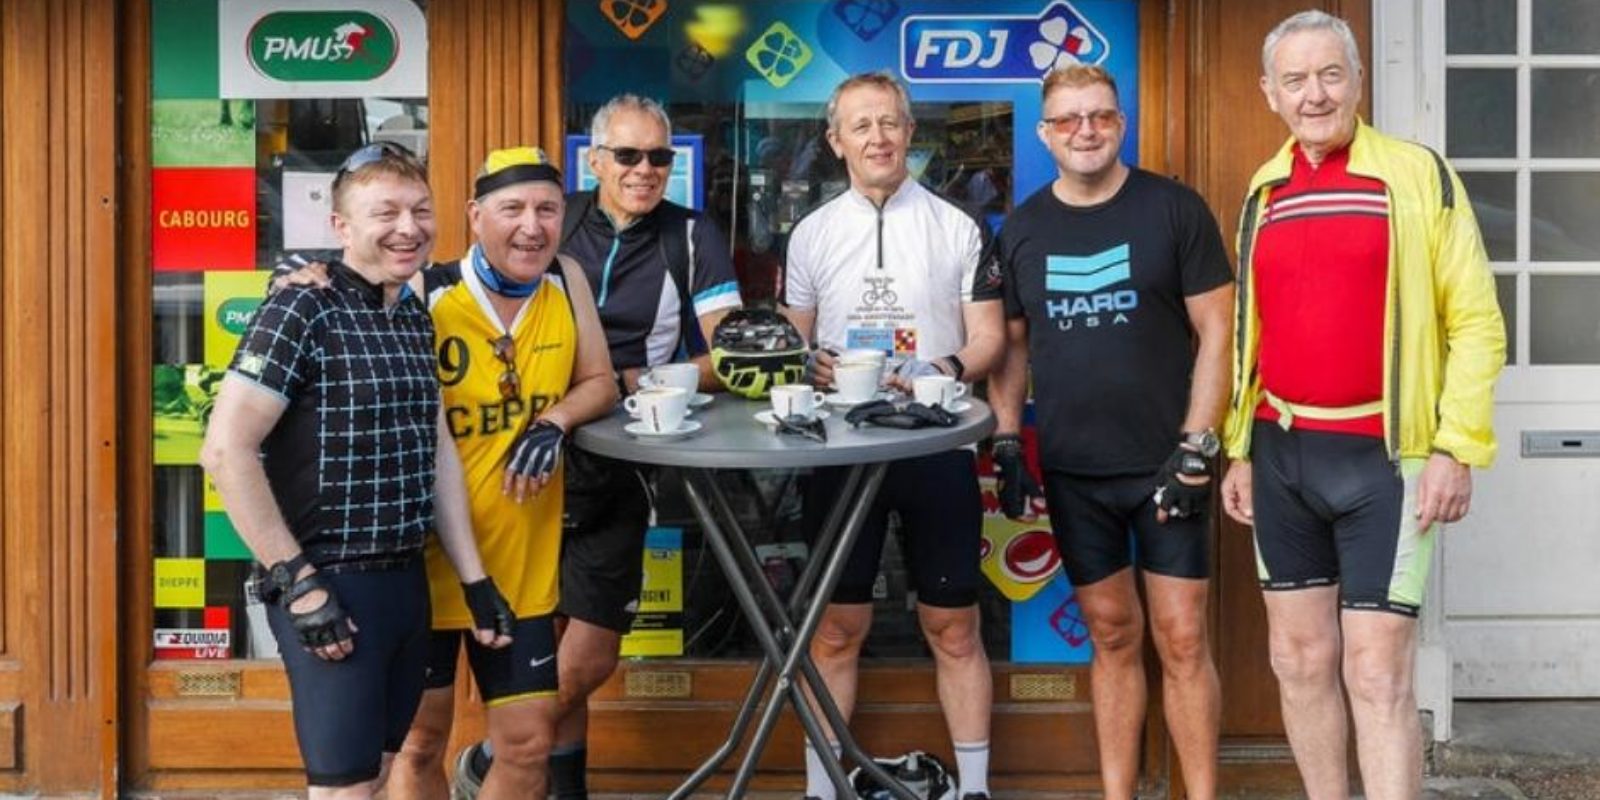 Six riders standing in front of a bar having after finishing their cycle